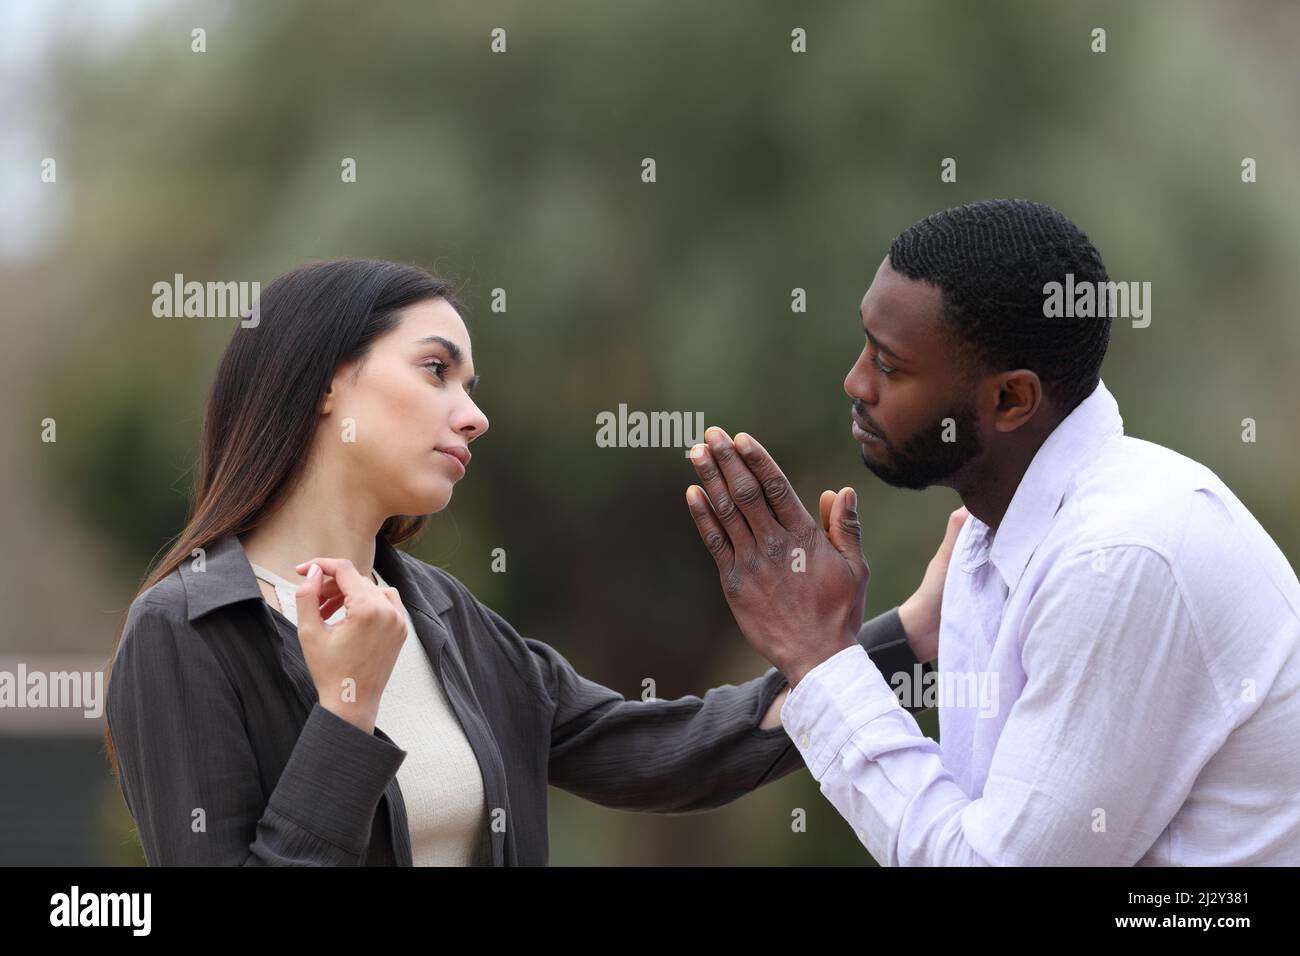 Regretful man asking forgive to a woman in a park Stock Photo